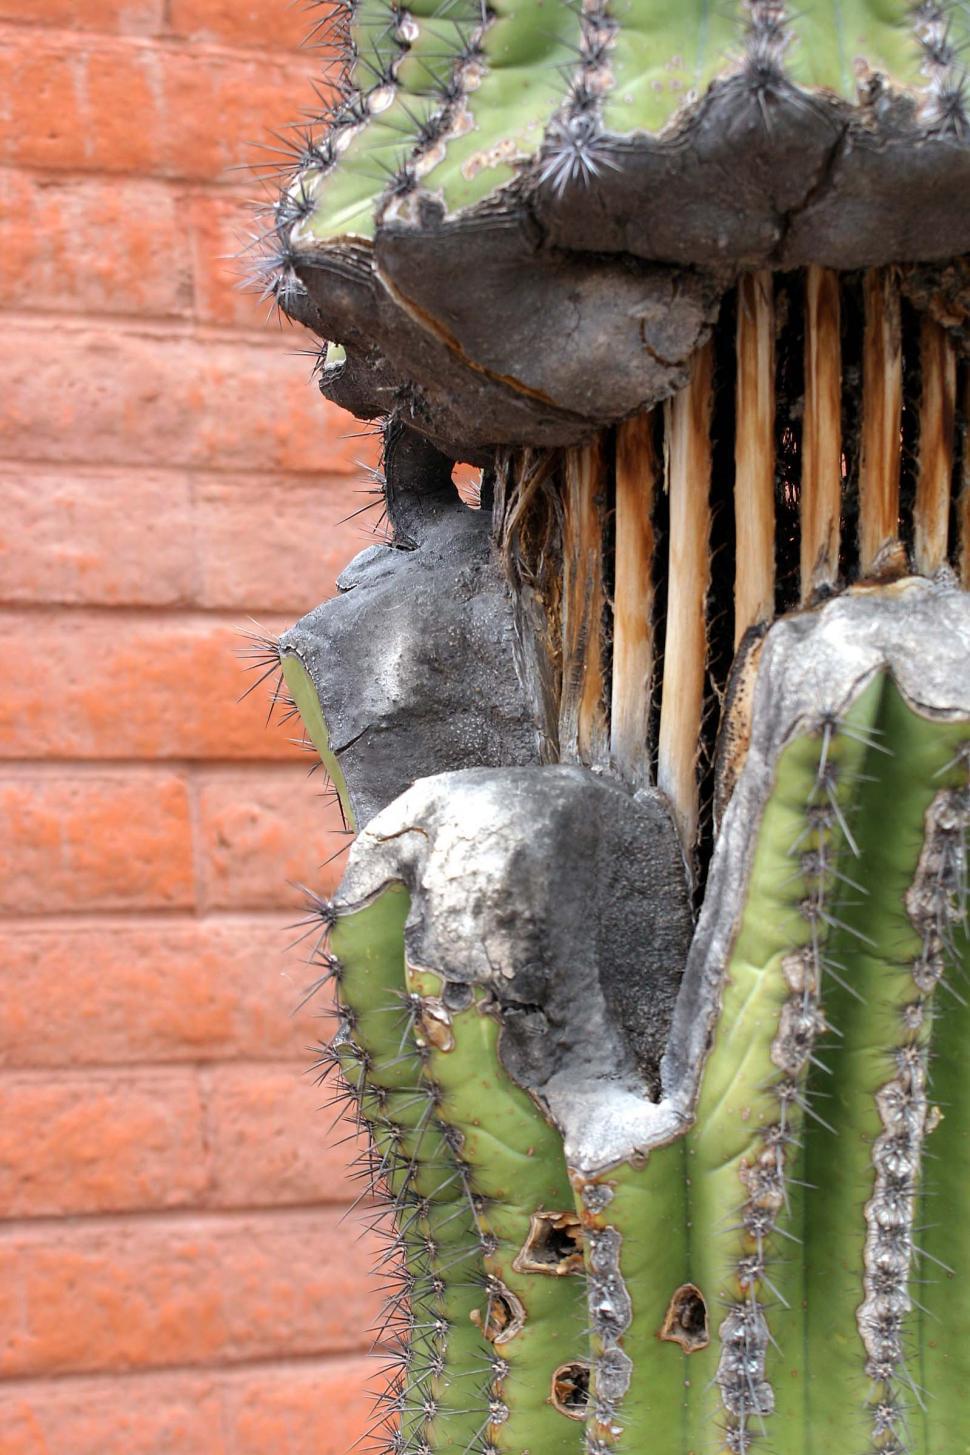 Free Image of Wounded Saguaro Cactus 